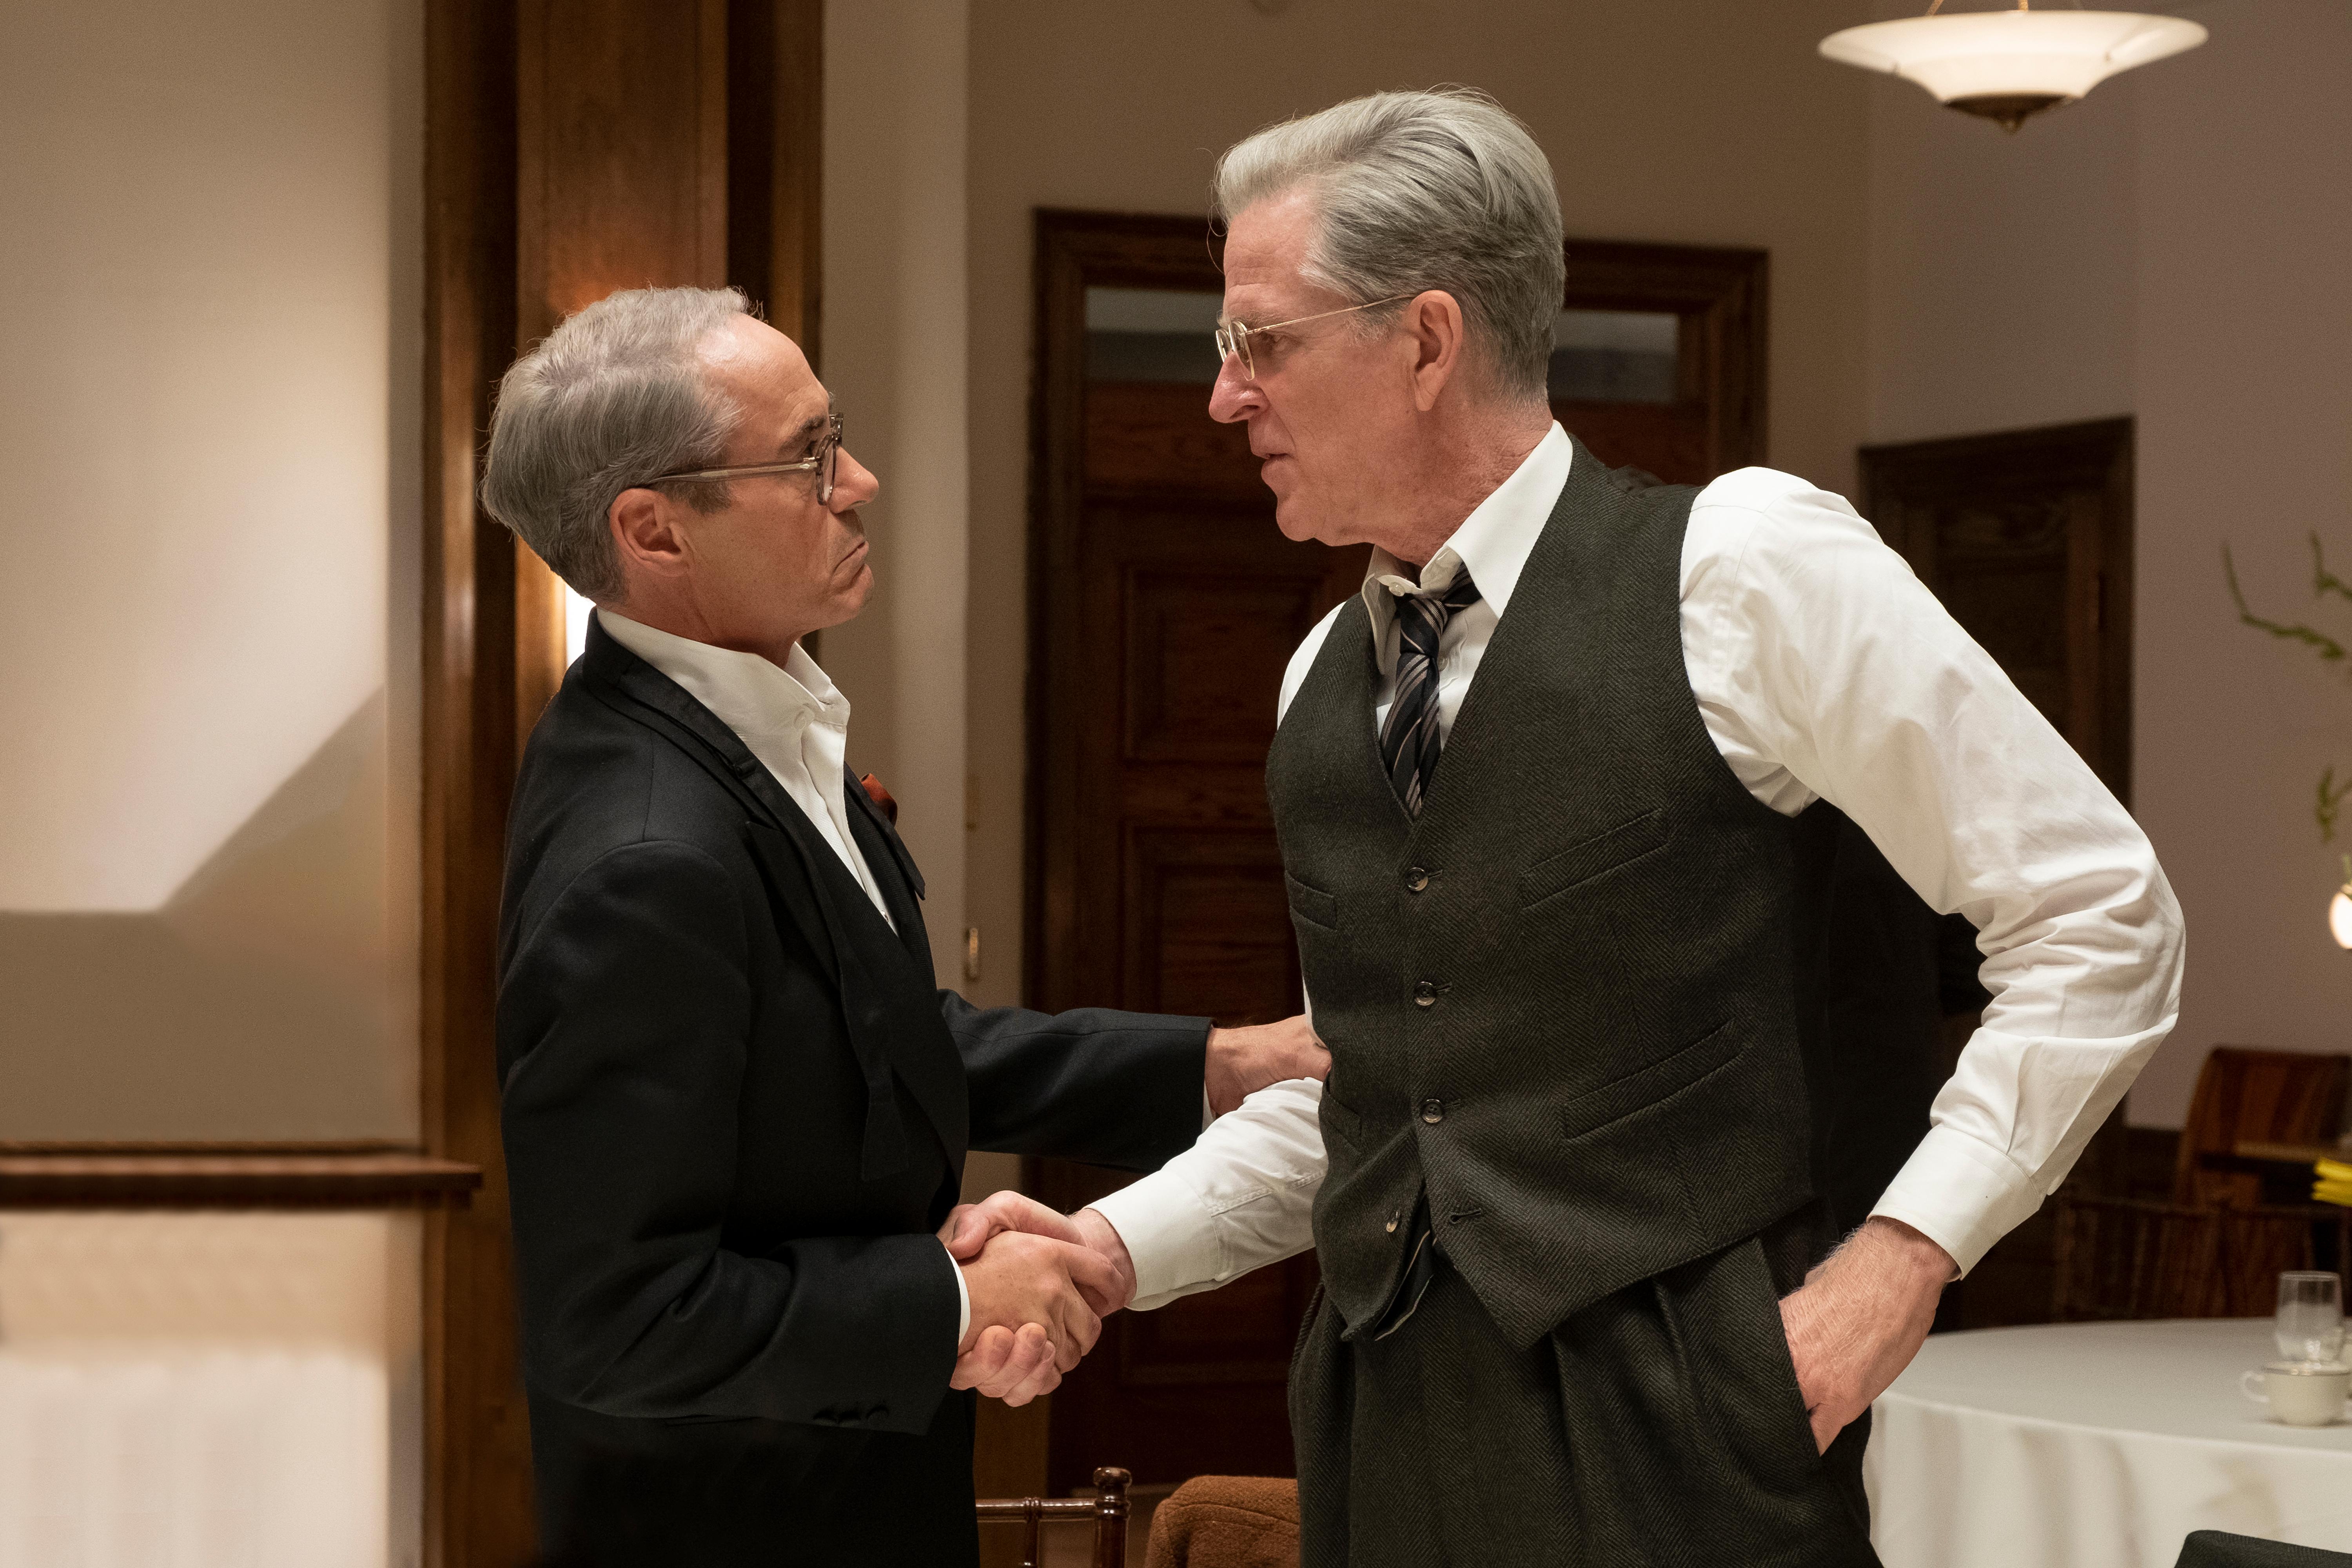 HD desktop wallpaper featuring two actors in character, shaking hands in a period-style setting, tagged with Oppenheimer, Robert Downey Jr., and Matthew Modine.